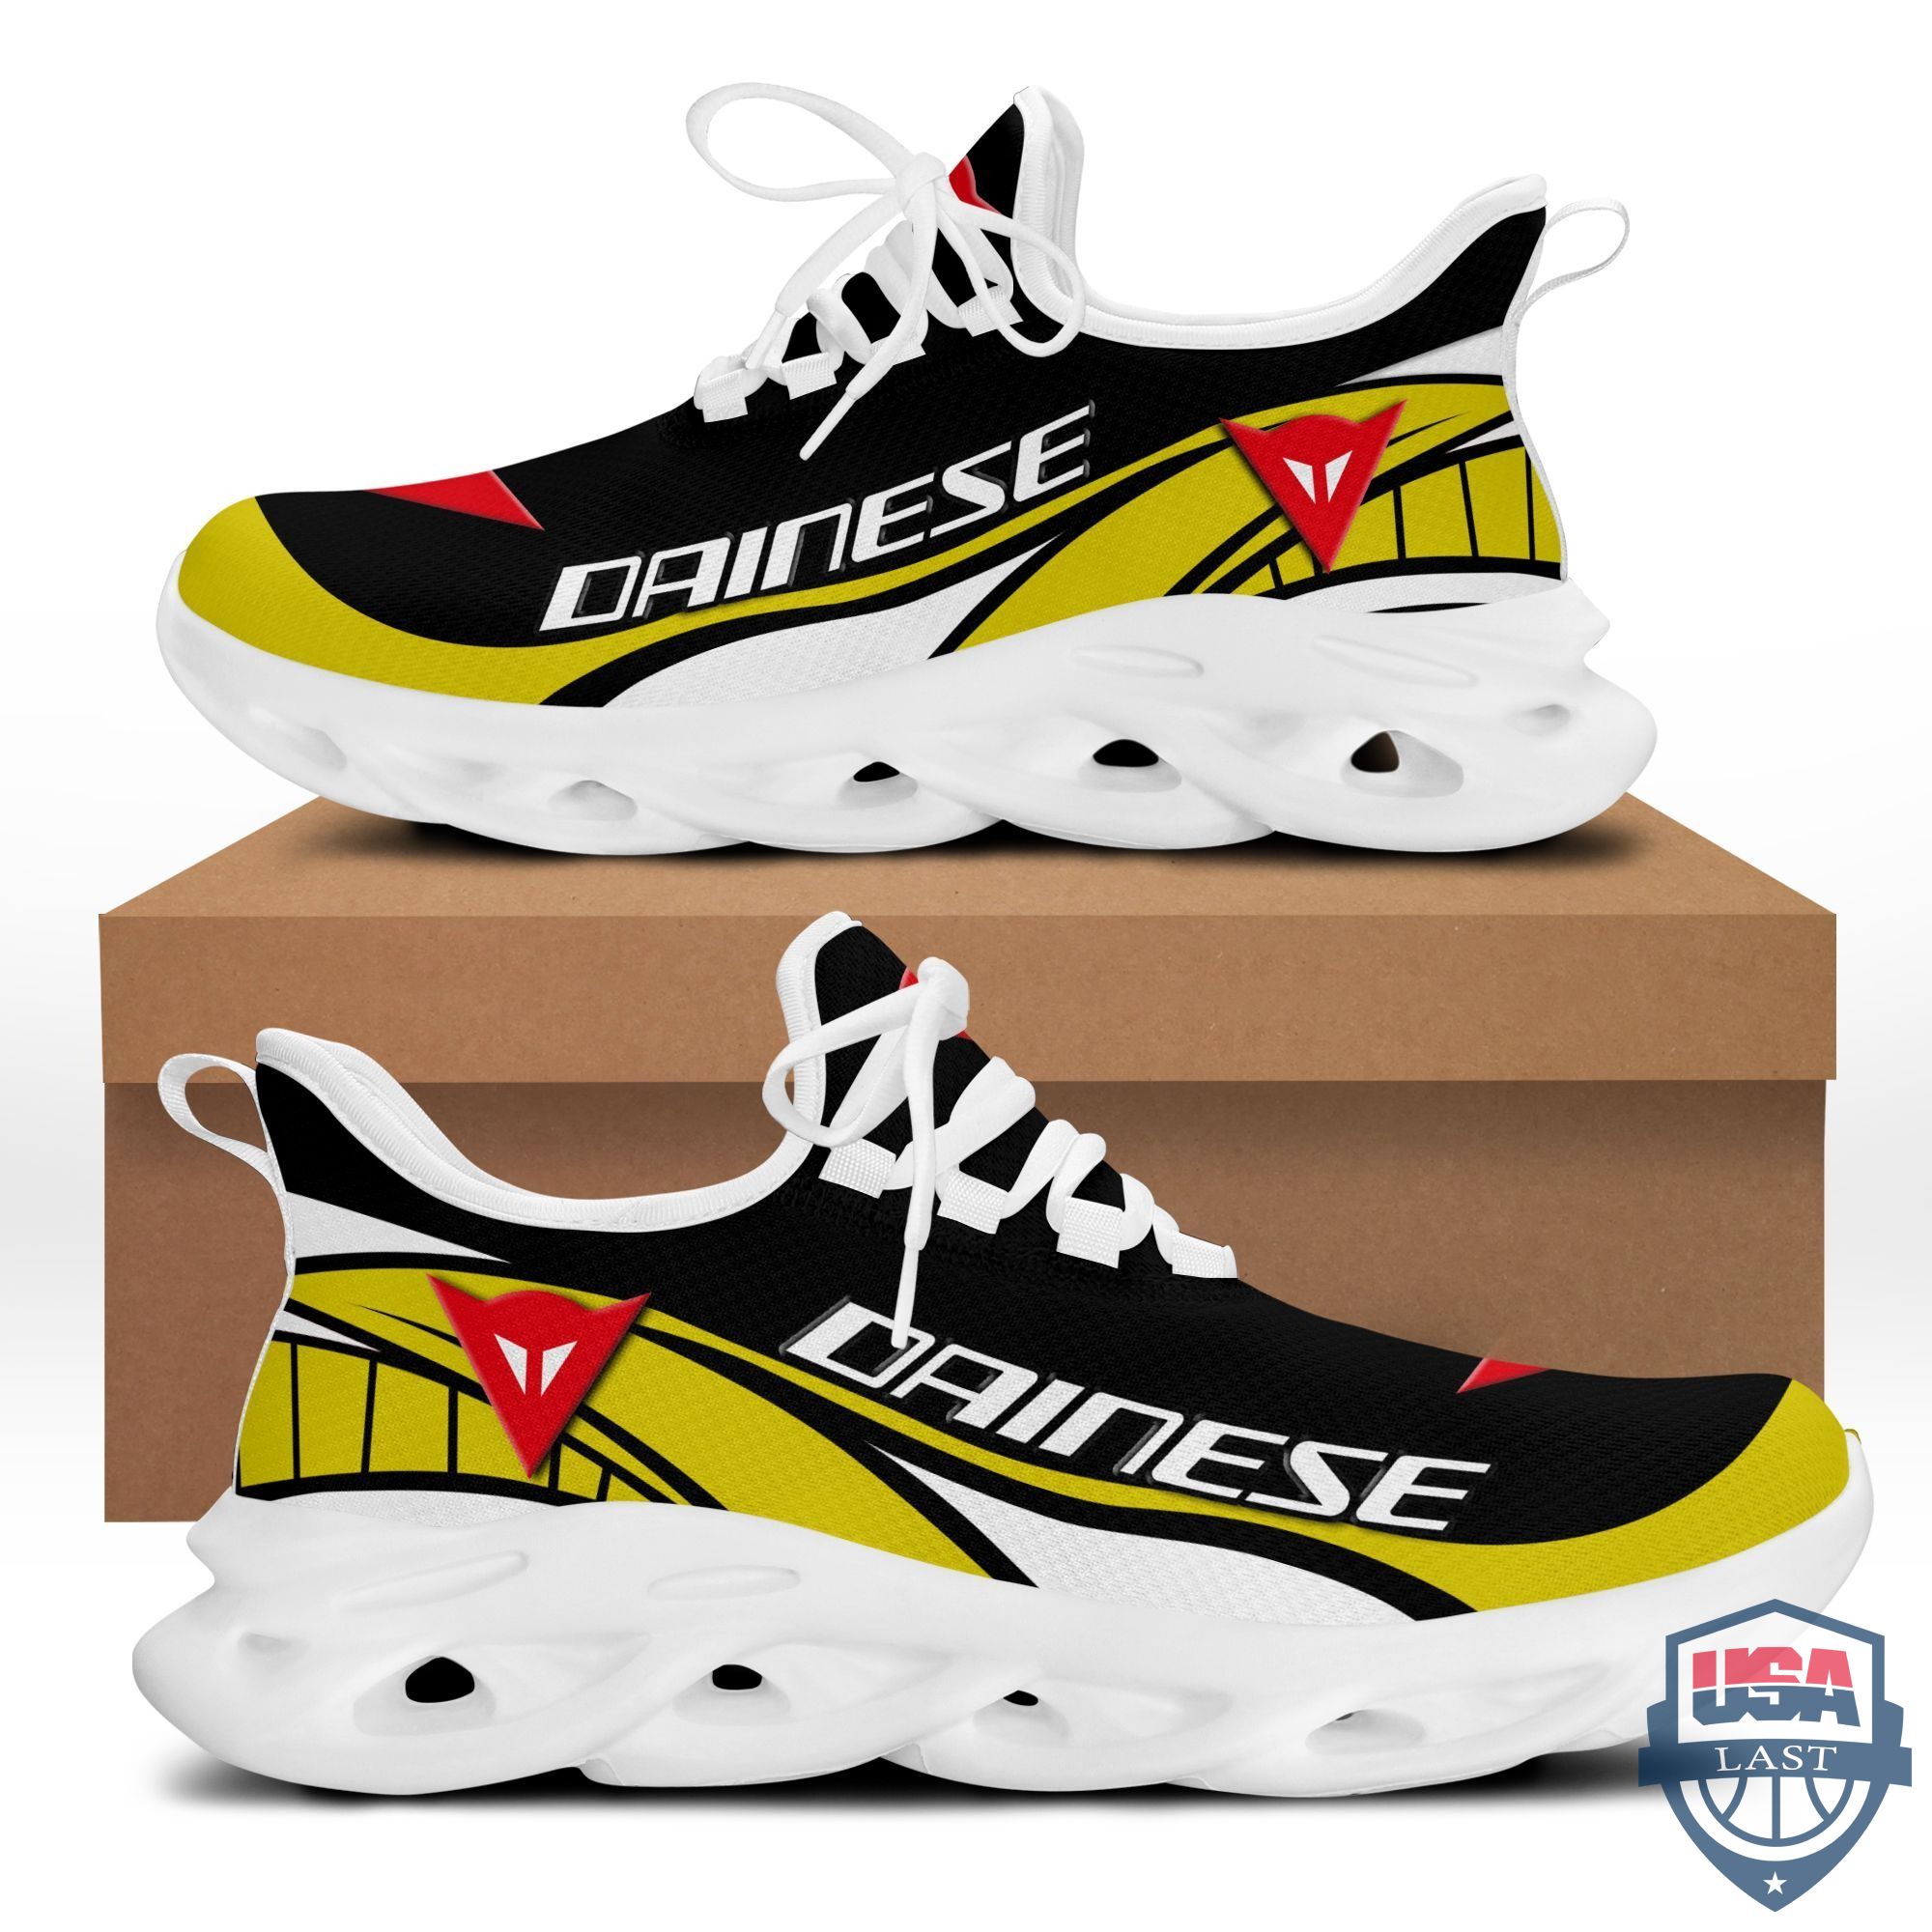 Dainese Clunky Max Soul Sneaker Yellow Version